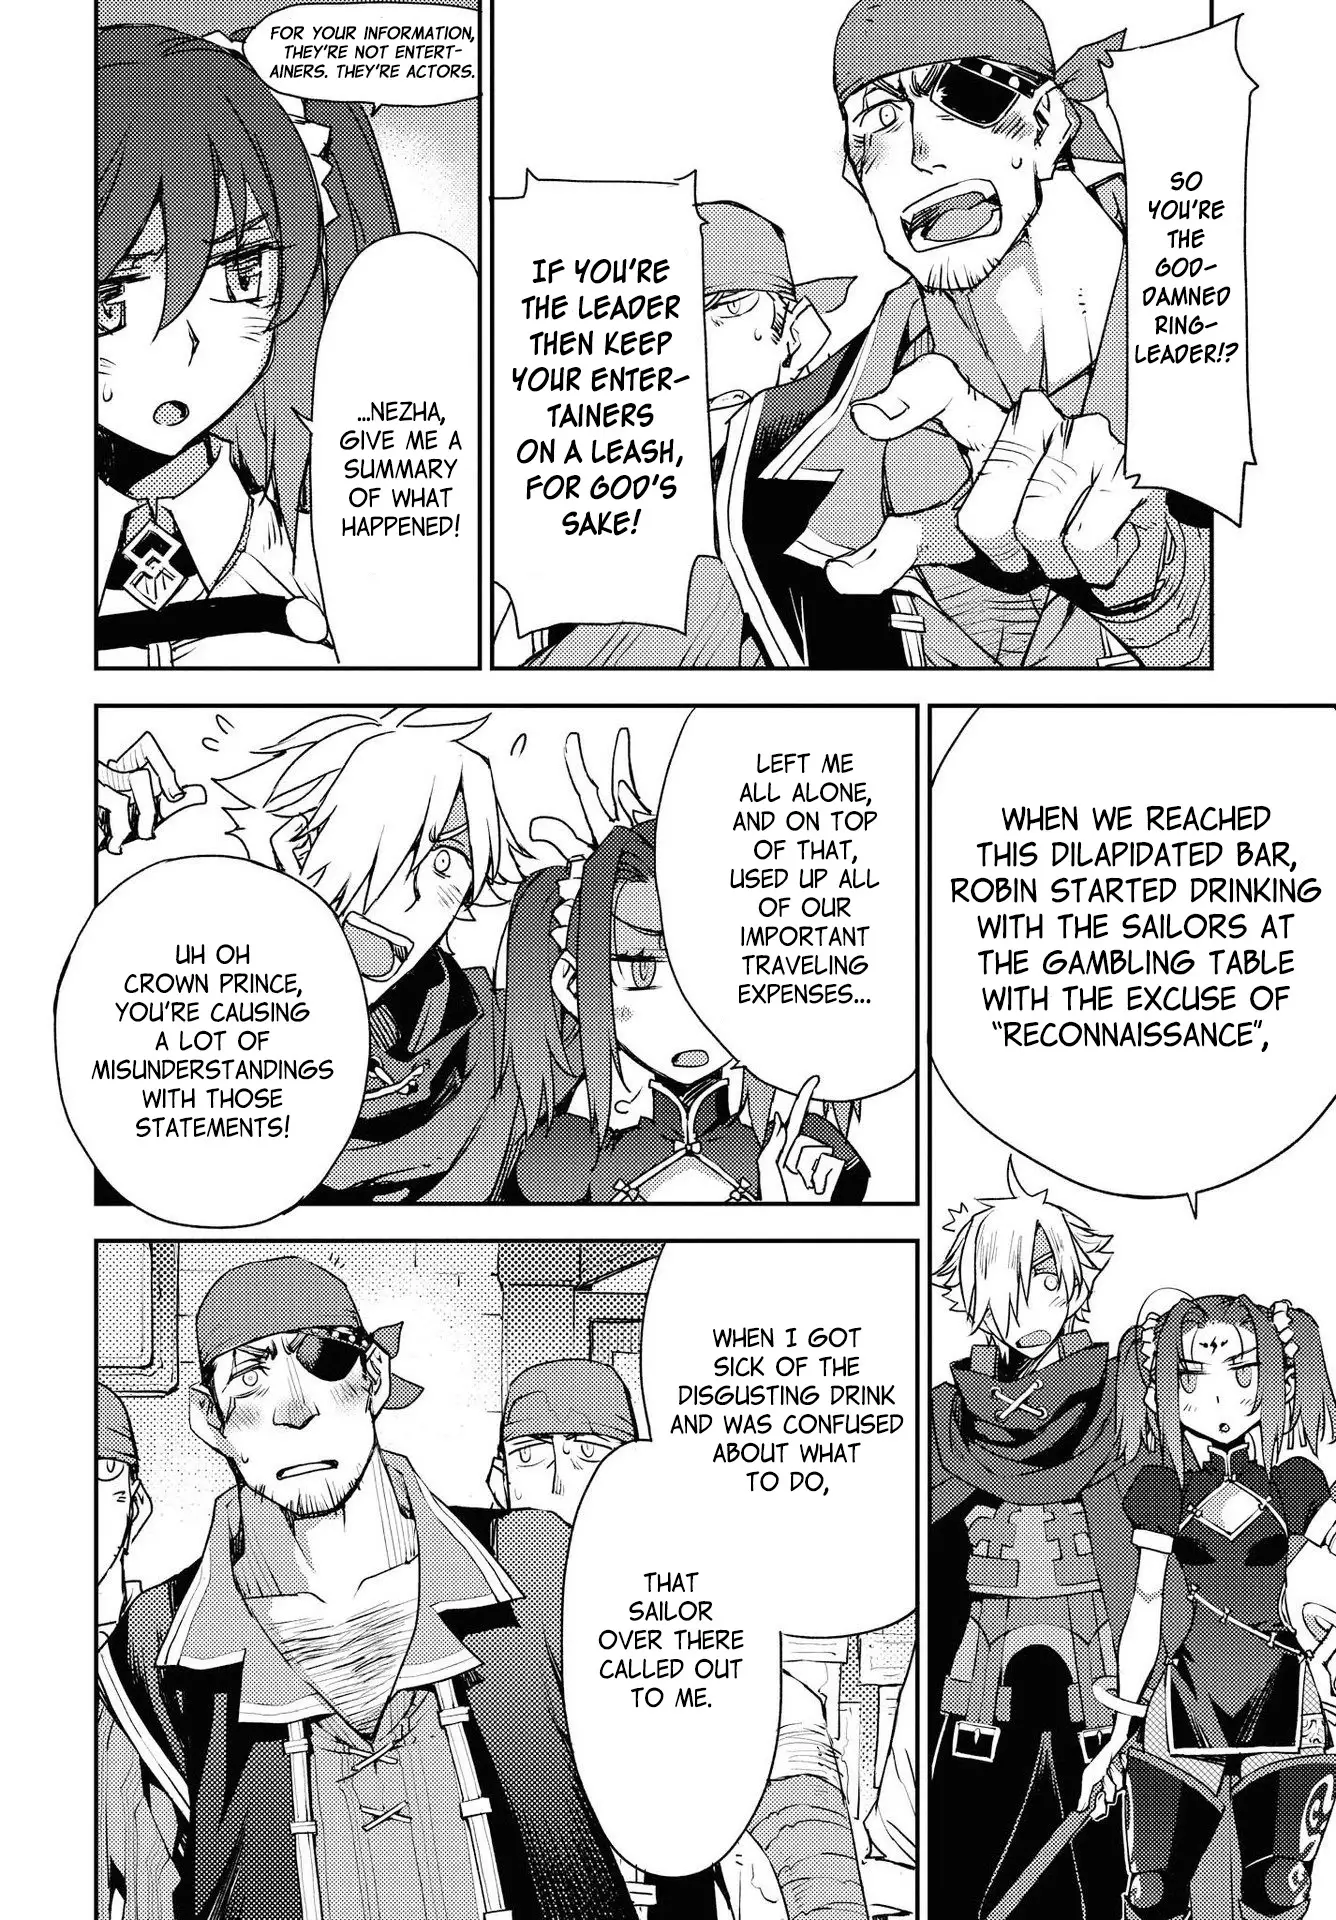 Fate/grand Order: Epic Of Remnant - Subspecies Singularity Iv: Taboo Advent Salem: Salem Of Heresy - 6 page 2